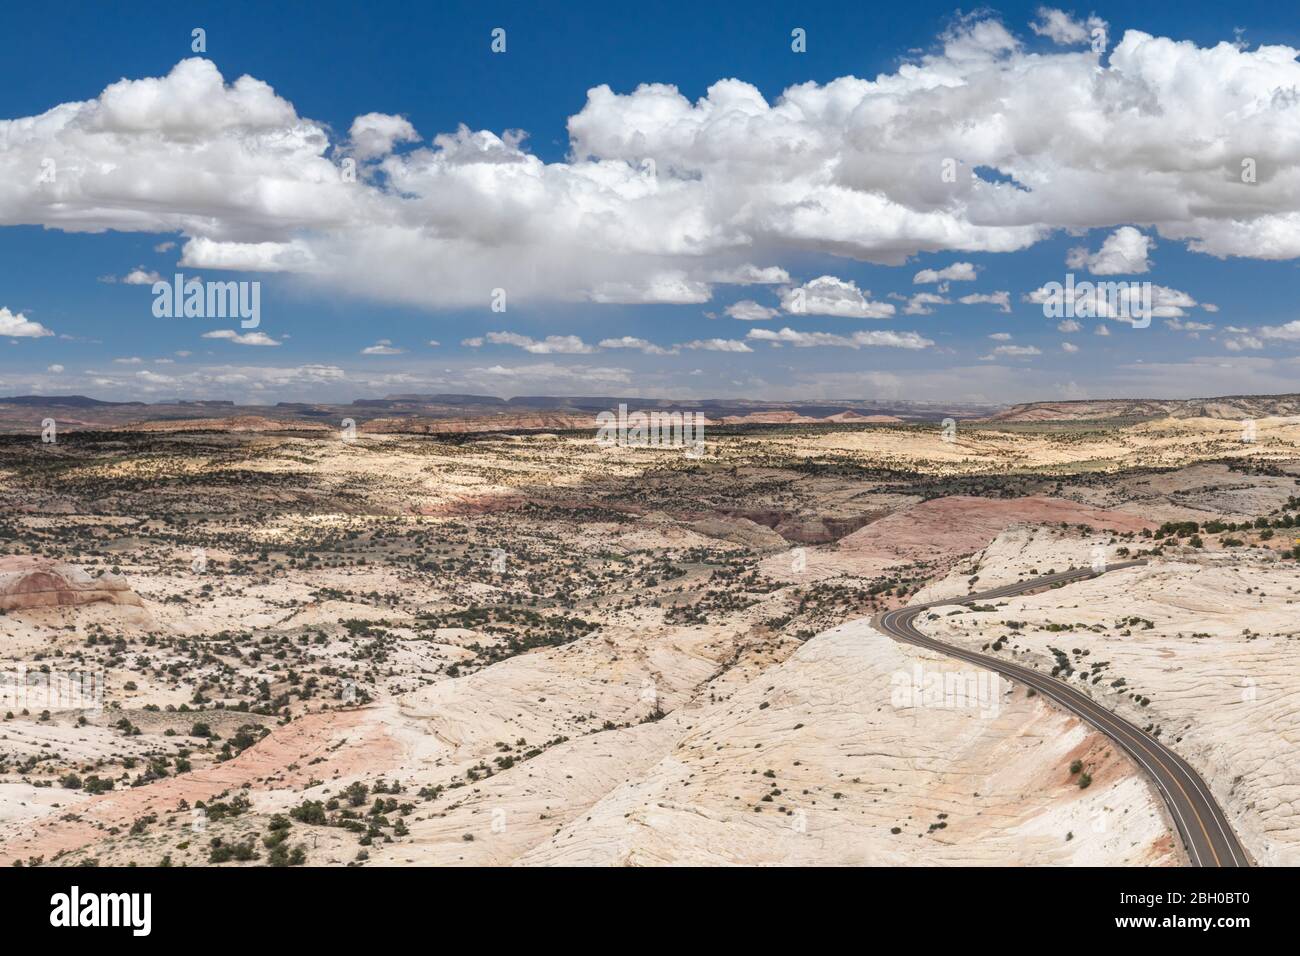 In Utah, a desertic landscape, under a blue sky with puffy clouds, is crossed by Scenic Byway 12 Stock Photo